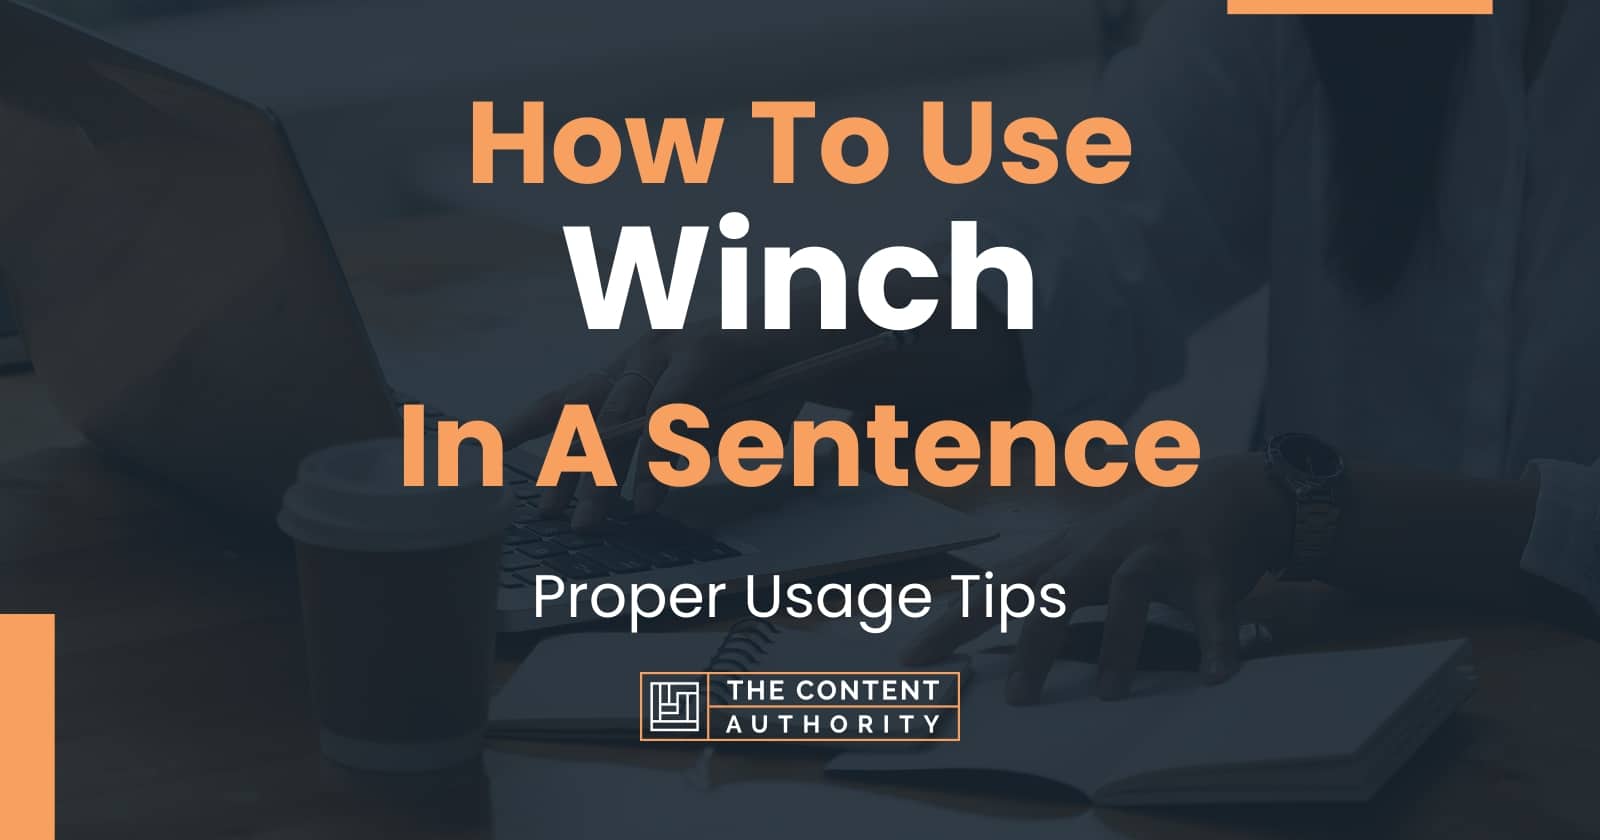 How To Use Winch In A Sentence: Proper Usage Tips